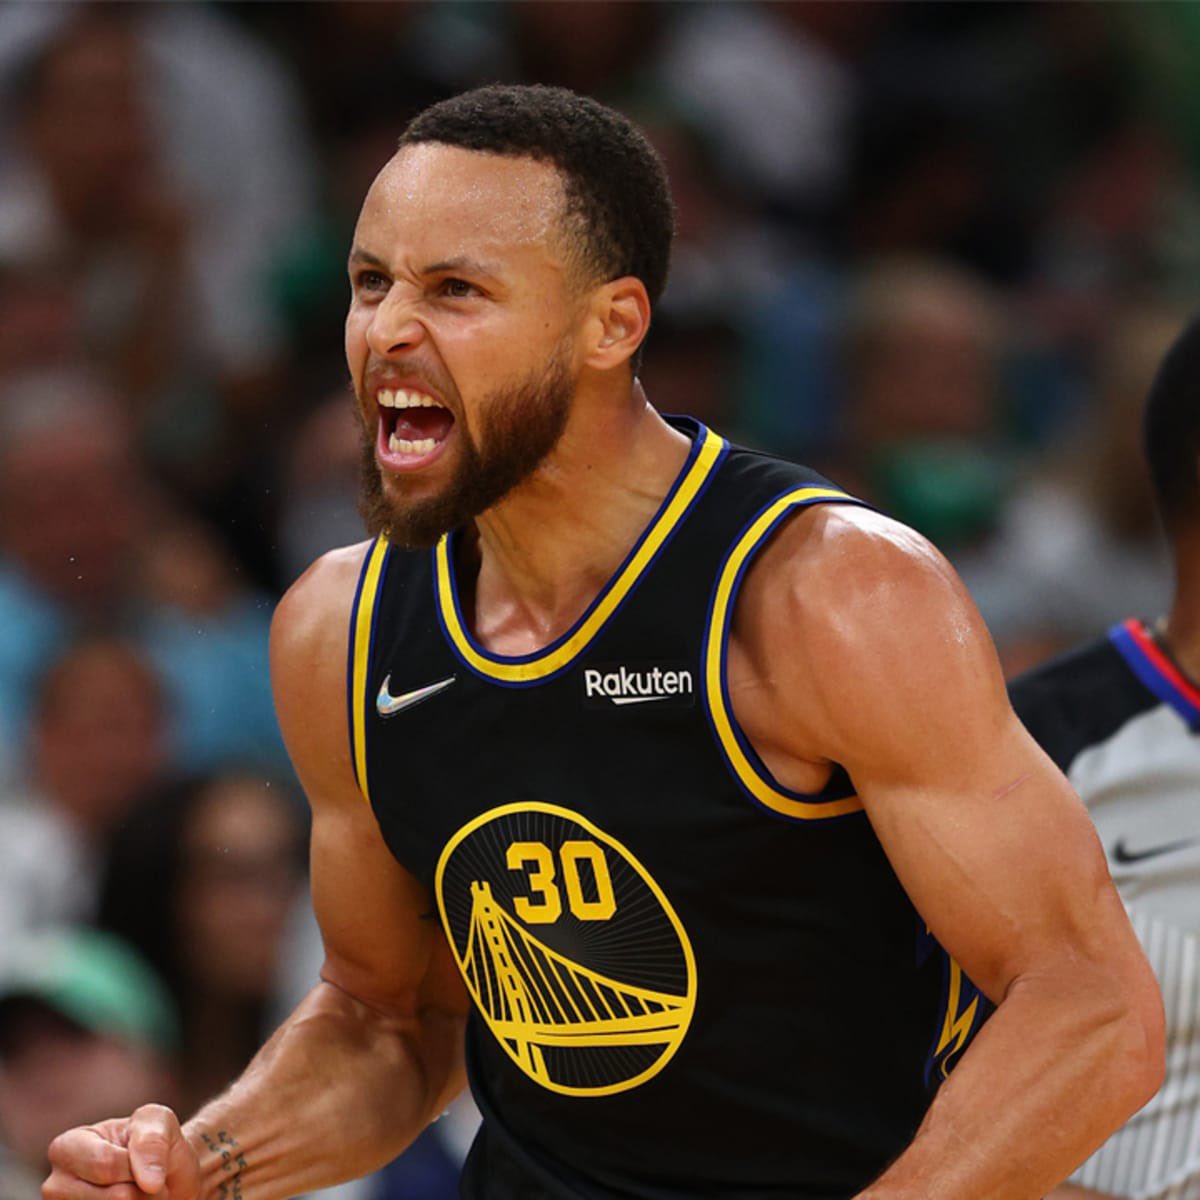 Most 3-pointers made in a Finals series in NBA history 1. Steph Curry: 32 (2016) 2. Steph: 31 (2022) 3. Danny Green: 27 (2013) 4. Steph: 25 (2015) 5. Klay: 24 (2019) 6. Steph: 23 (2019) 7. Steph: 22 (2018) 8. Ray Allen: 22 (2008) 9. Klay: 21 (2016) 10. Steph: 19 (2017) GOAT. 🎯